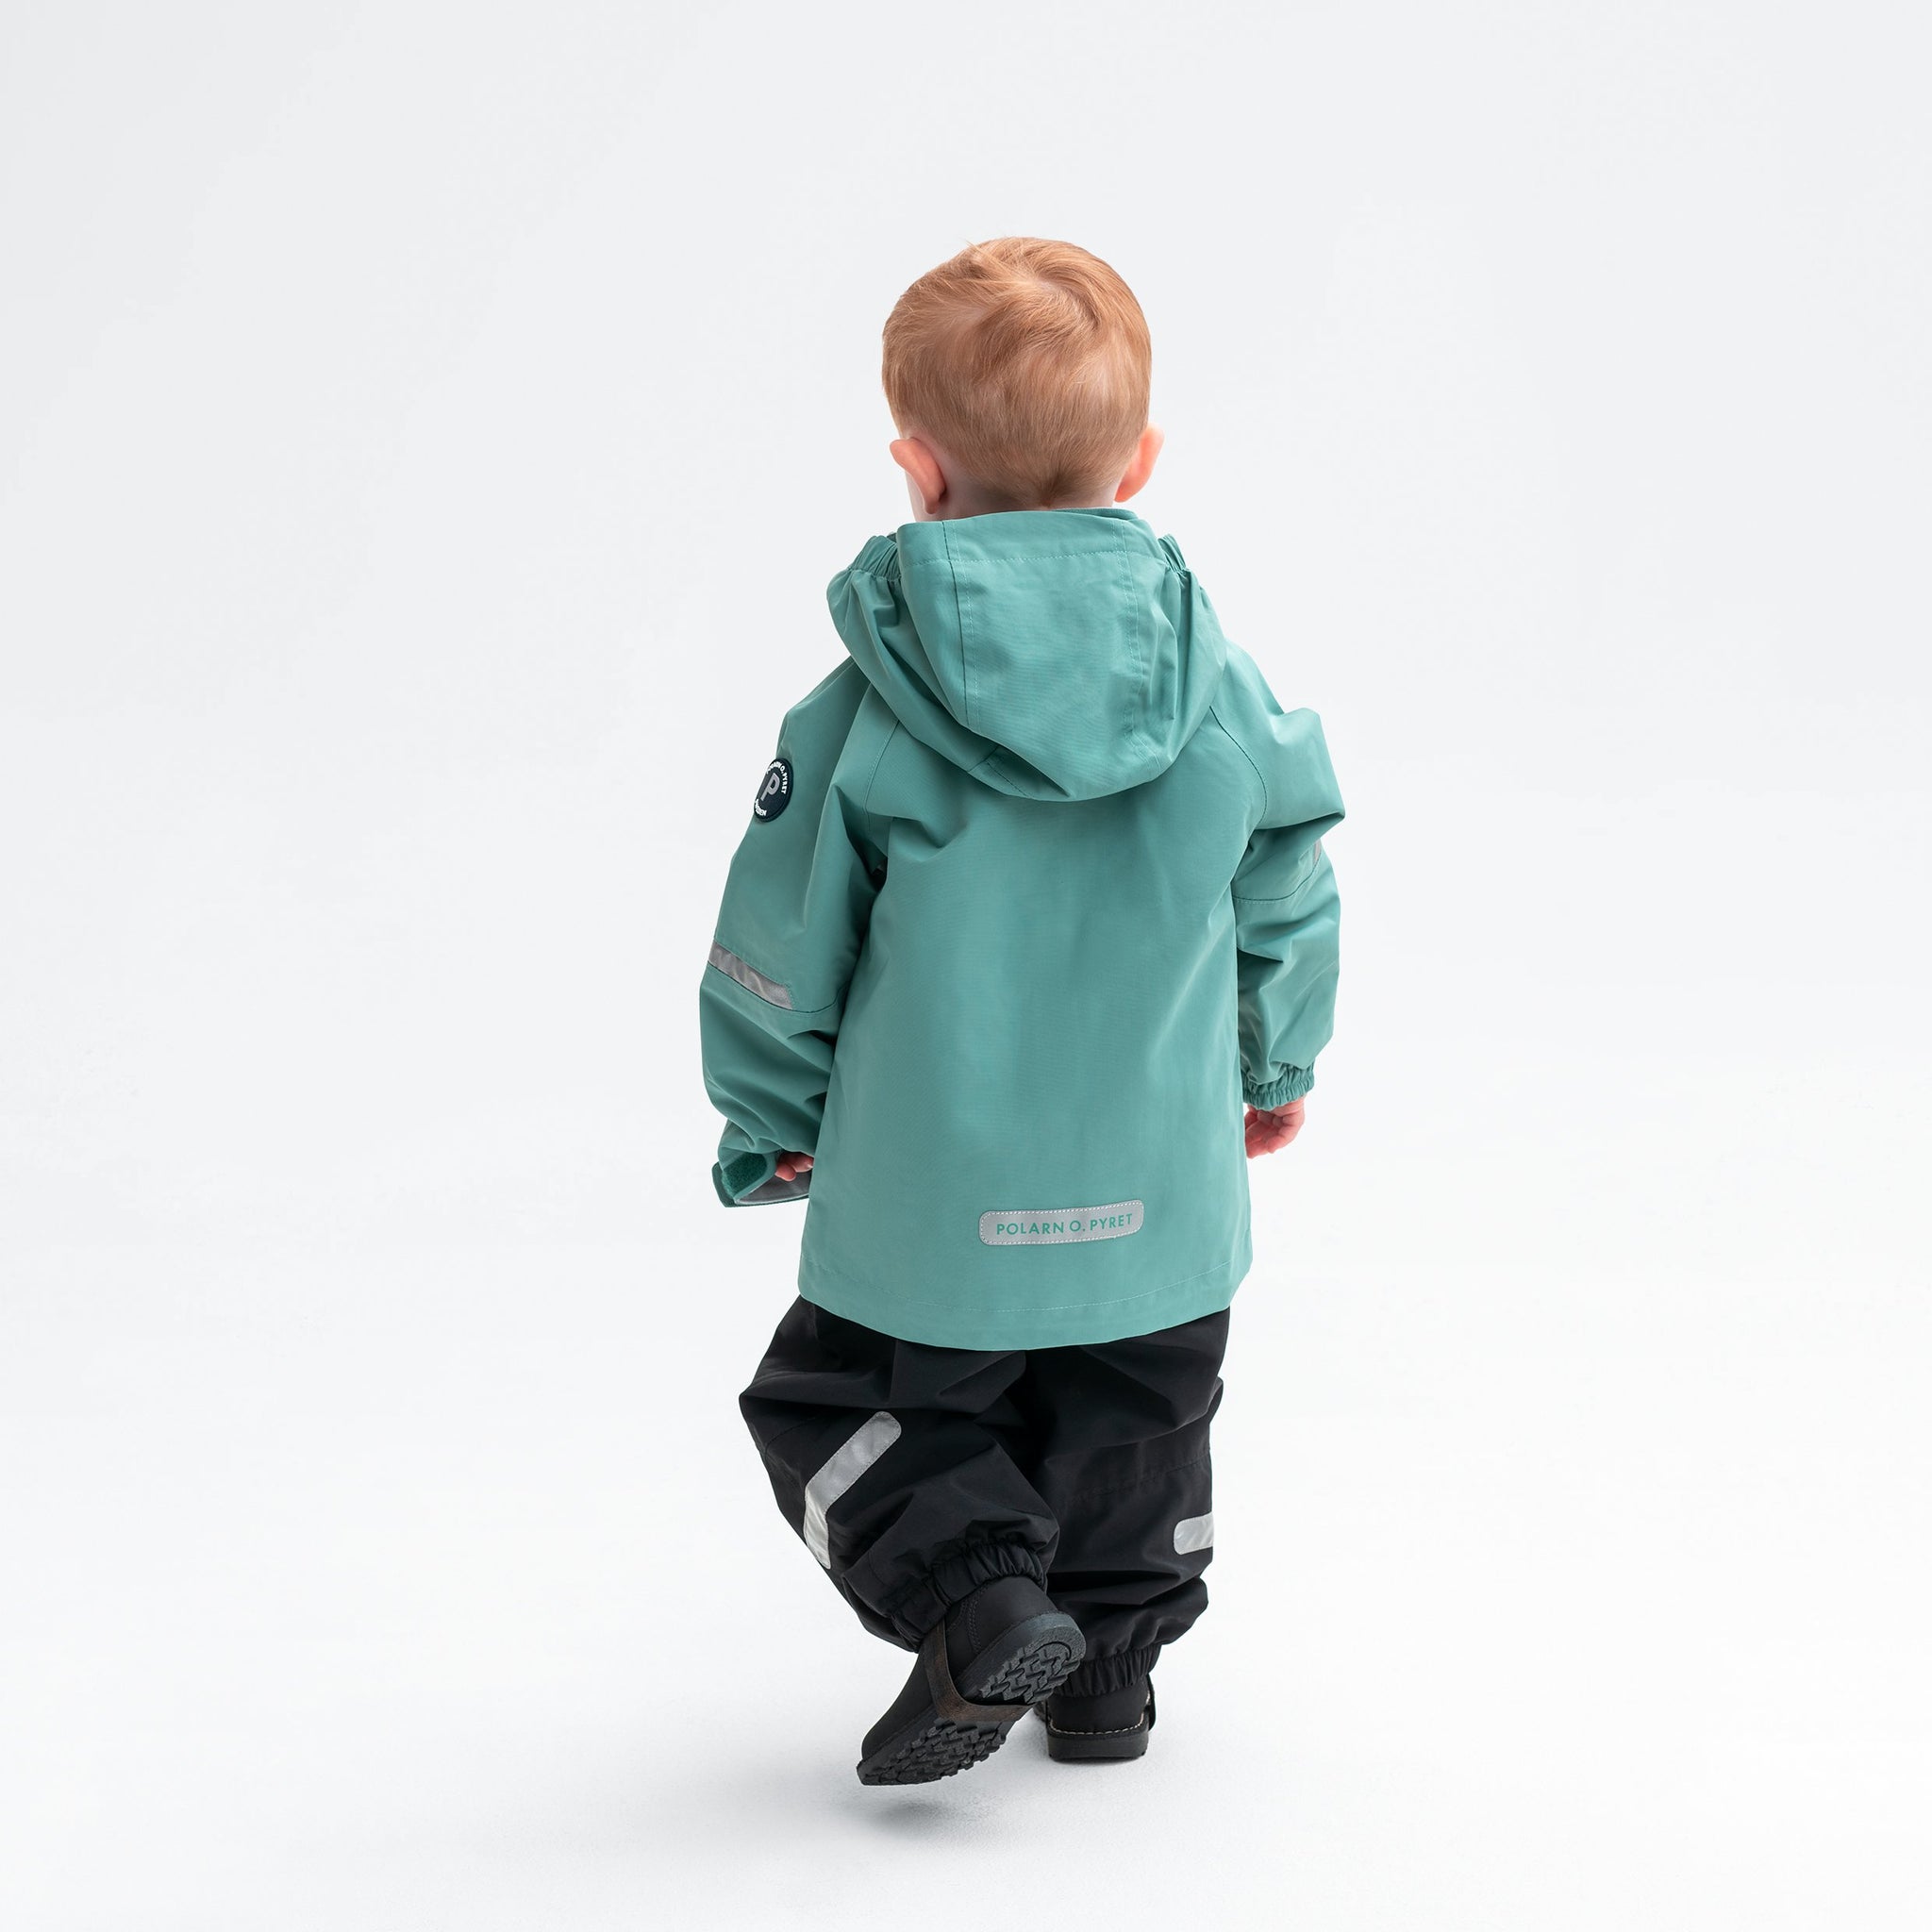 A little boy wearing a green kids waterproof shell jacket with hood, made from eco-friendly water repellent technology.